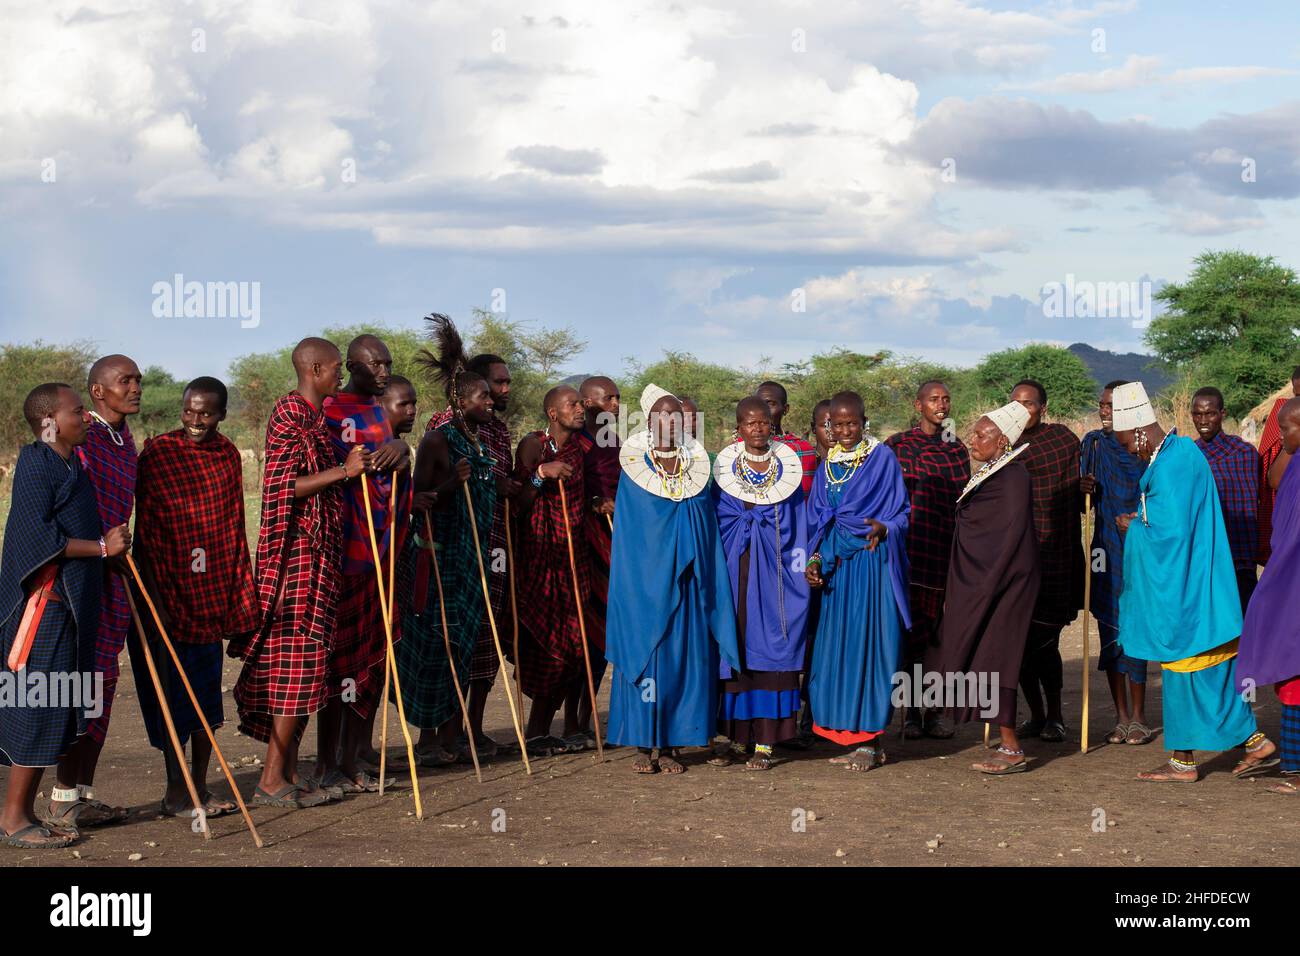 Men and women of Masai Tribe dancing and singing outdoors in traditional attire 12 16 2021 Arusha Tanzania Stock Photo